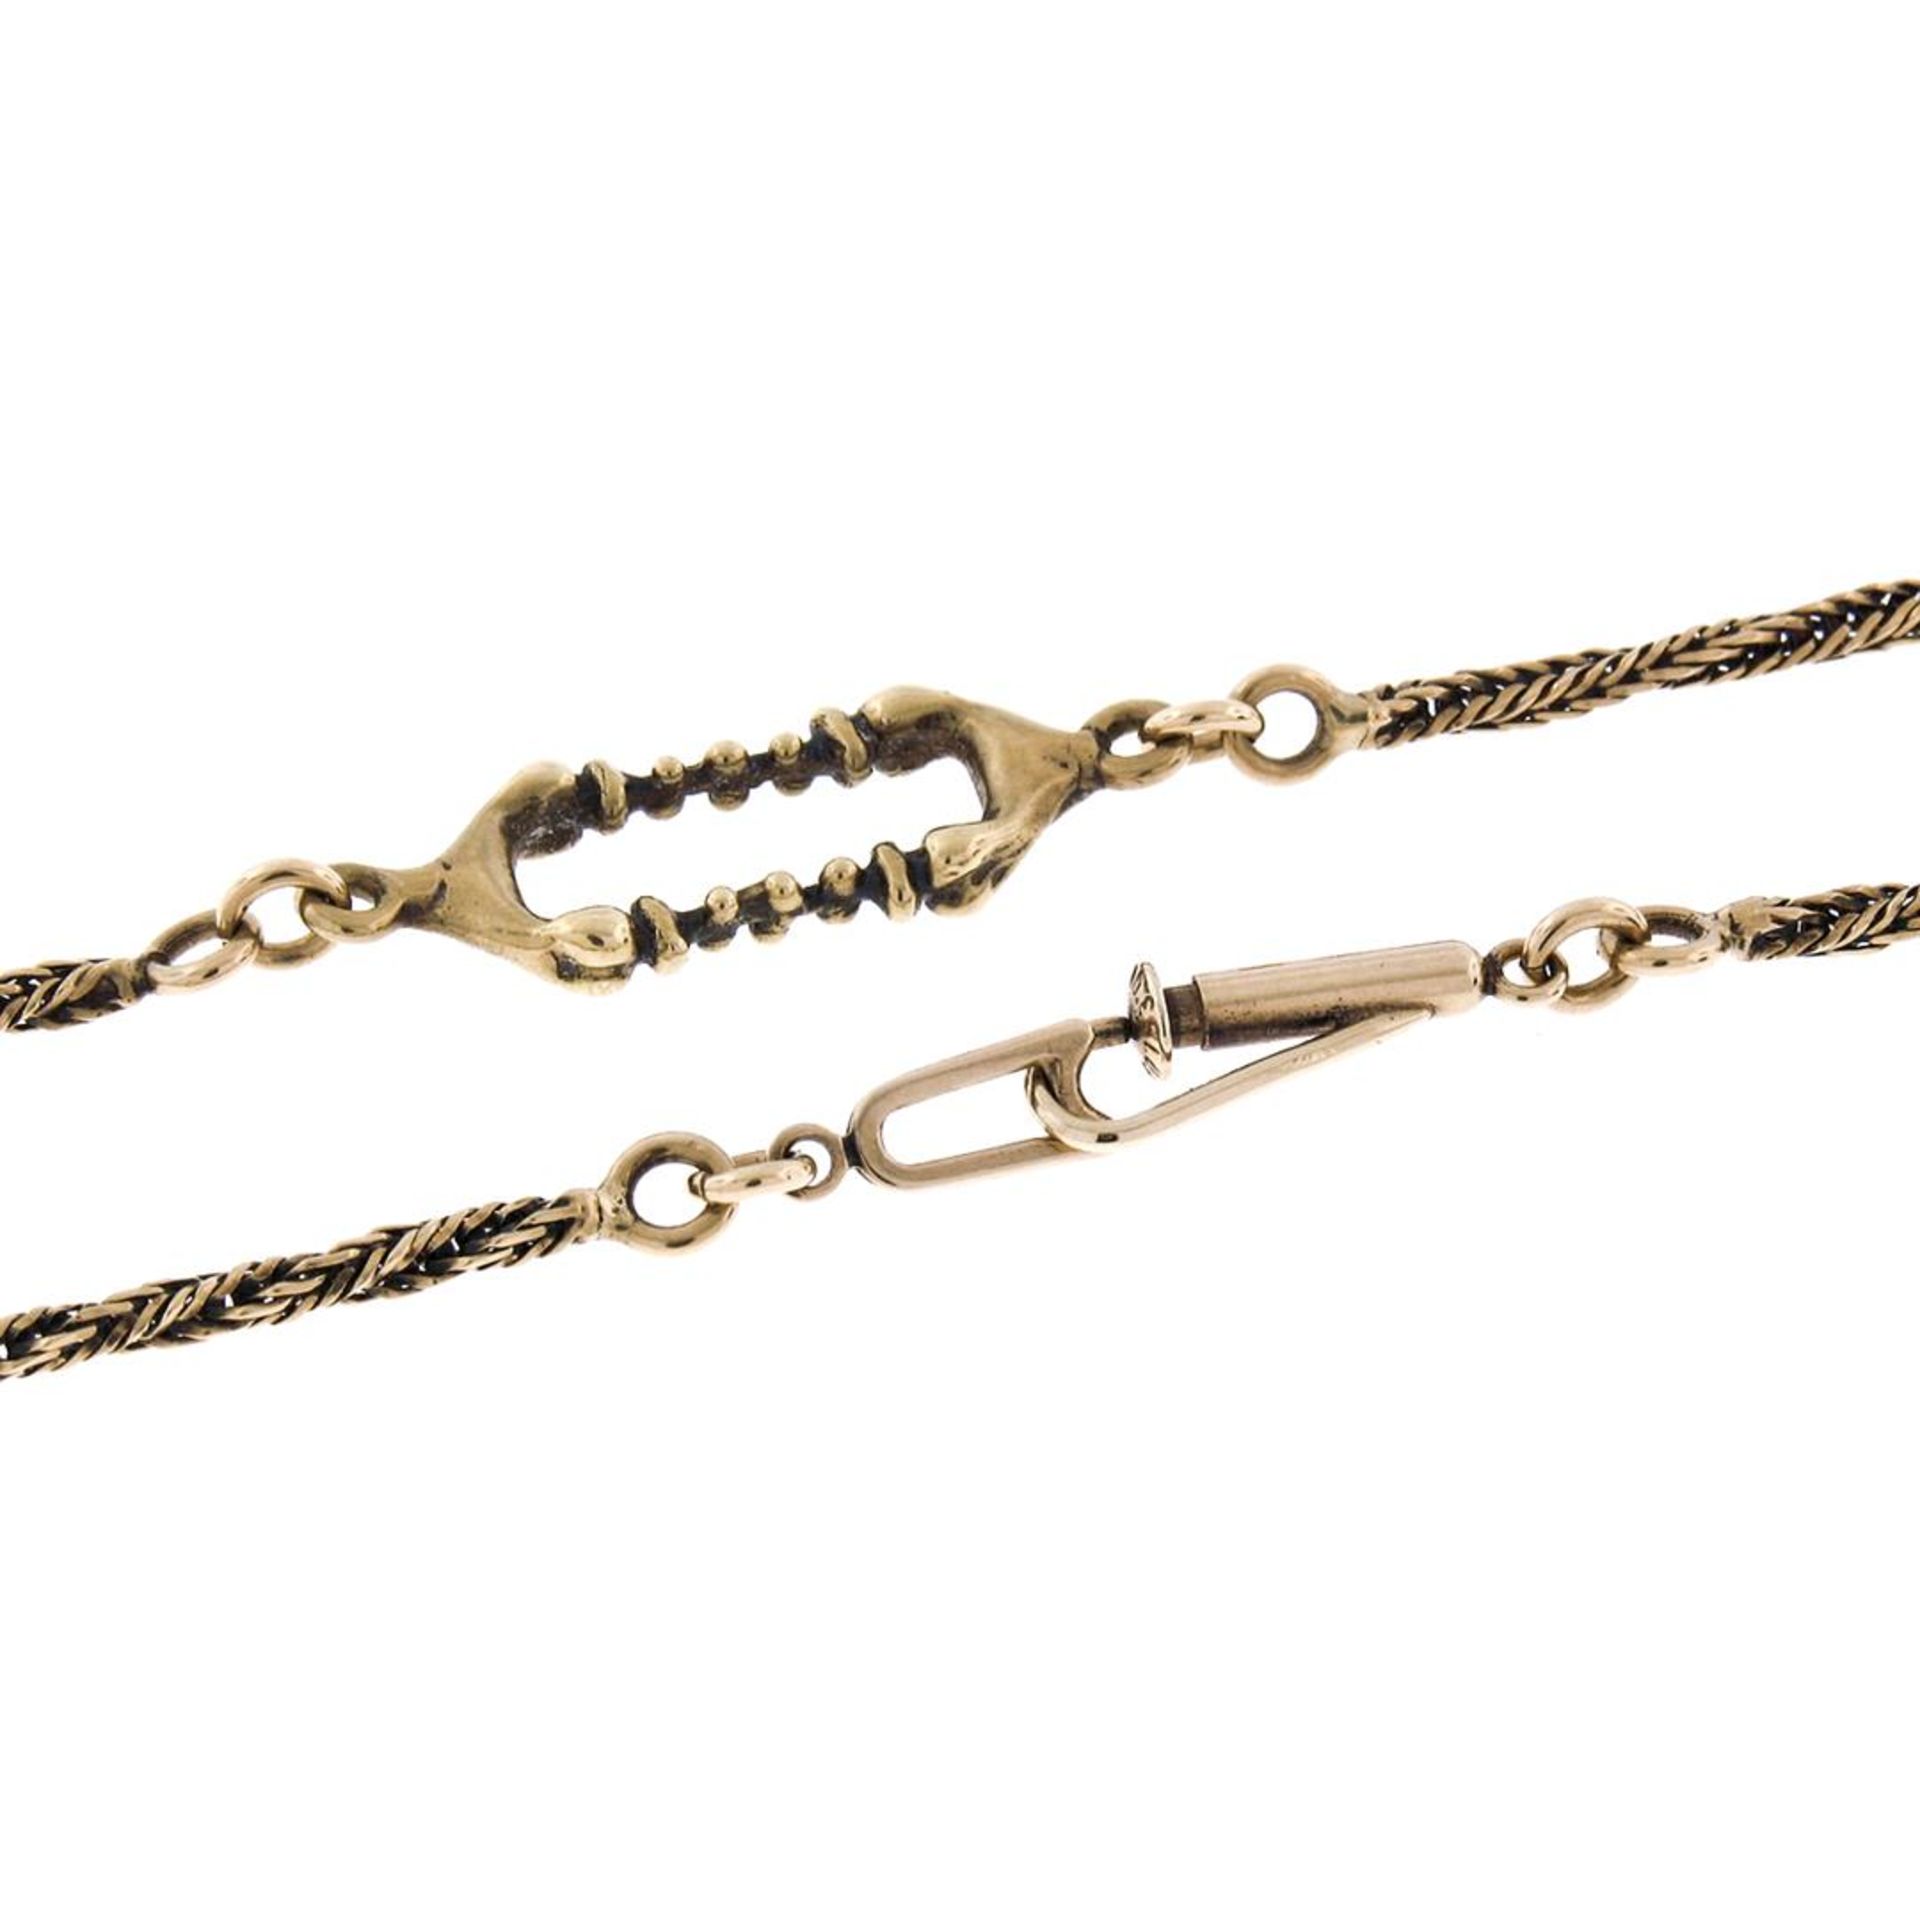 UNIQUE Vintage 18K Yellow Gold 20" Twisted & Open Bar Link Chain Necklace - Image 6 of 7